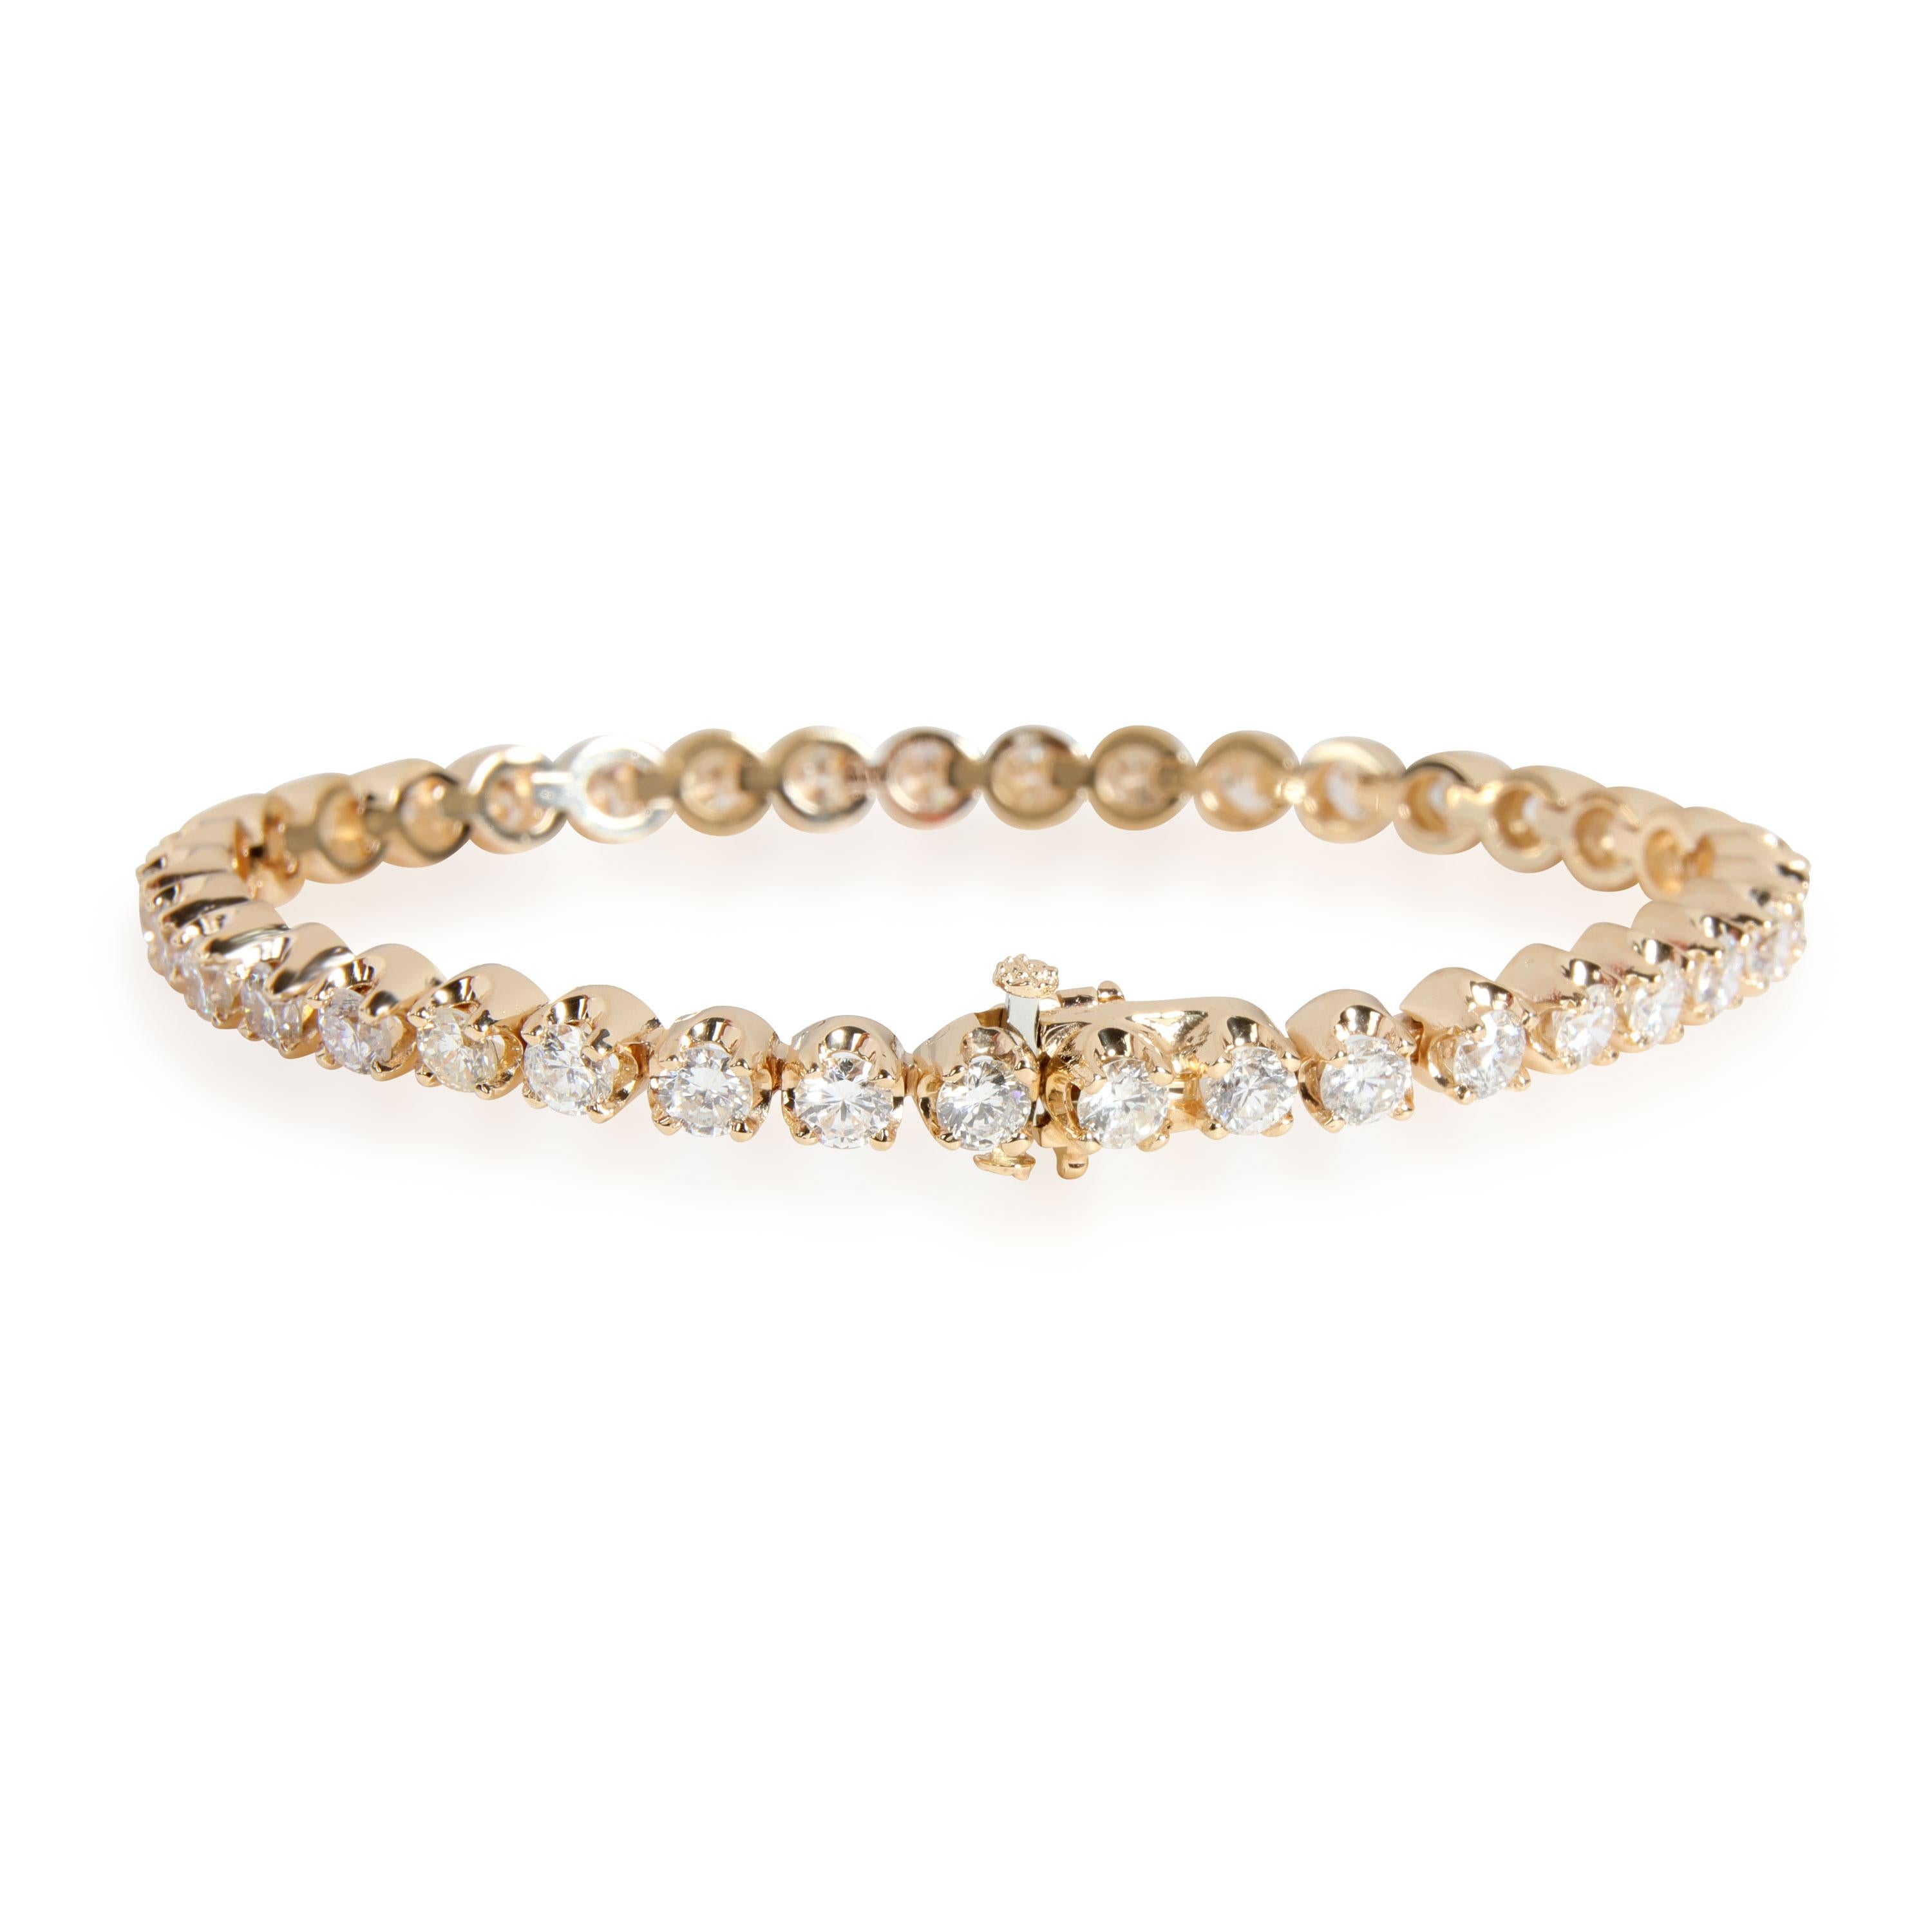 Diamond Tennis Bracelet in 14K Yellow Gold 6.30 CTW

PRIMARY DETAILS
SKU: 111301
Listing Title: Diamond Tennis Bracelet in 14K Yellow Gold 6.30 CTW
Condition Description: In excellent condition and recently polished. Chain is 7 inches in